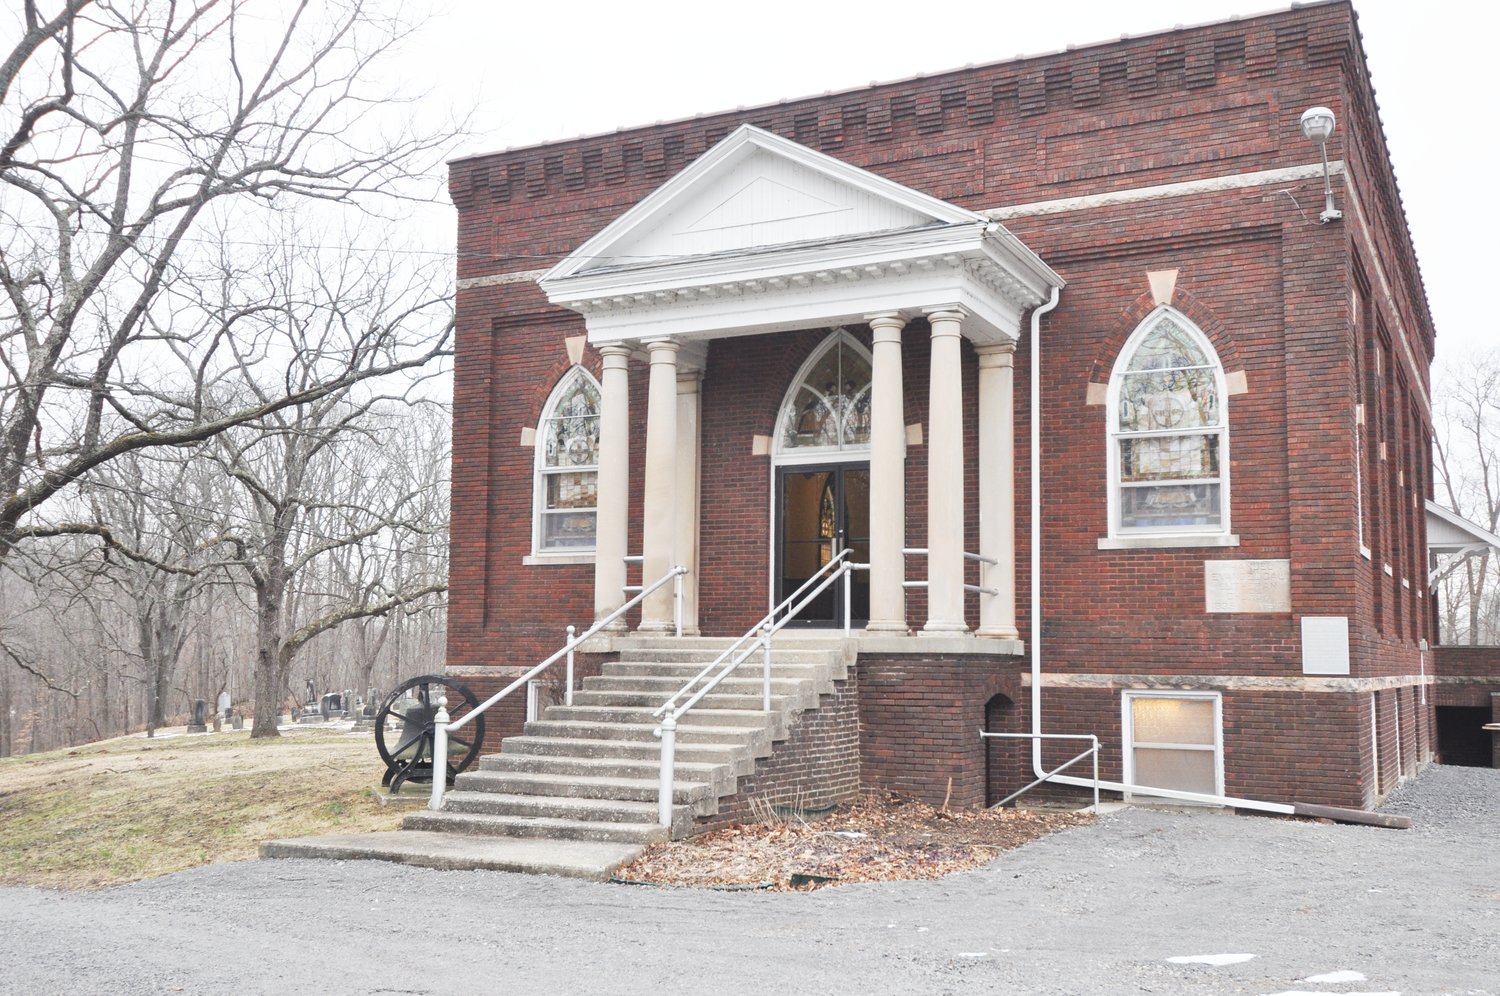 When Phanuel Lutheran Church closed in 2018, the building and a few acres of surrounding land were given to Indiana Landmarks, which sold the property to a Fountain County man and his business partner for an event center.